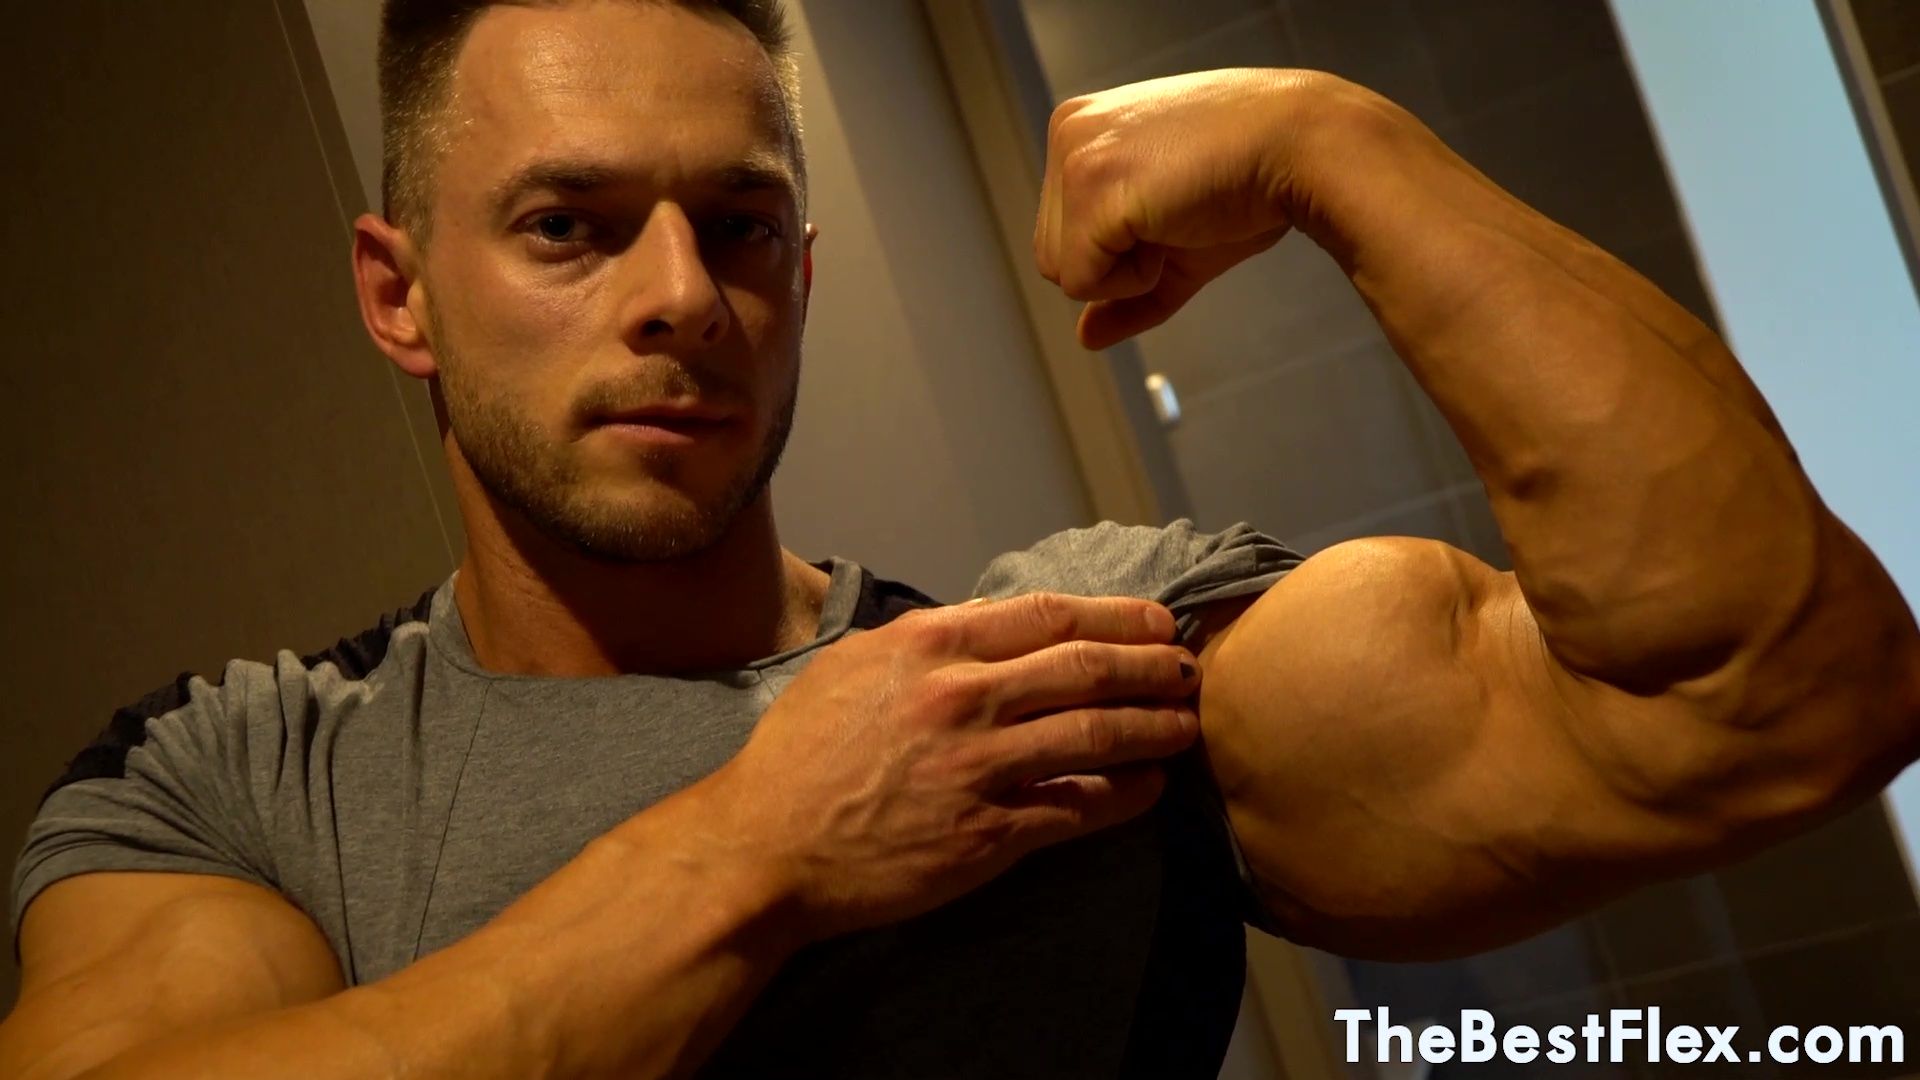 The Best Flex: Ryan James - Ripped Blonde Muscle Hunk 